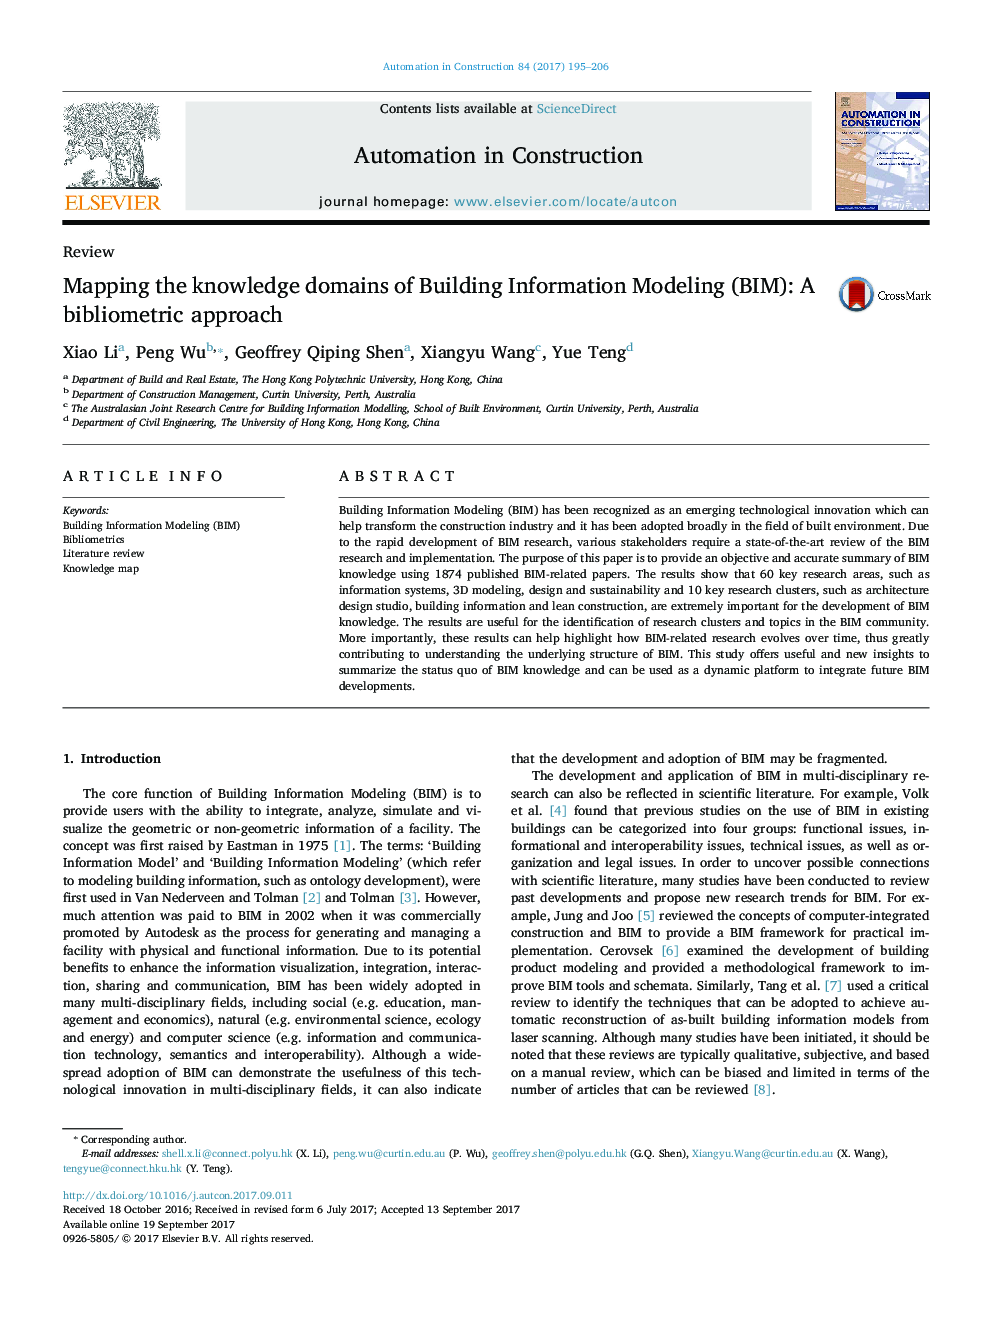 Mapping the knowledge domains of Building Information Modeling (BIM): A bibliometric approach